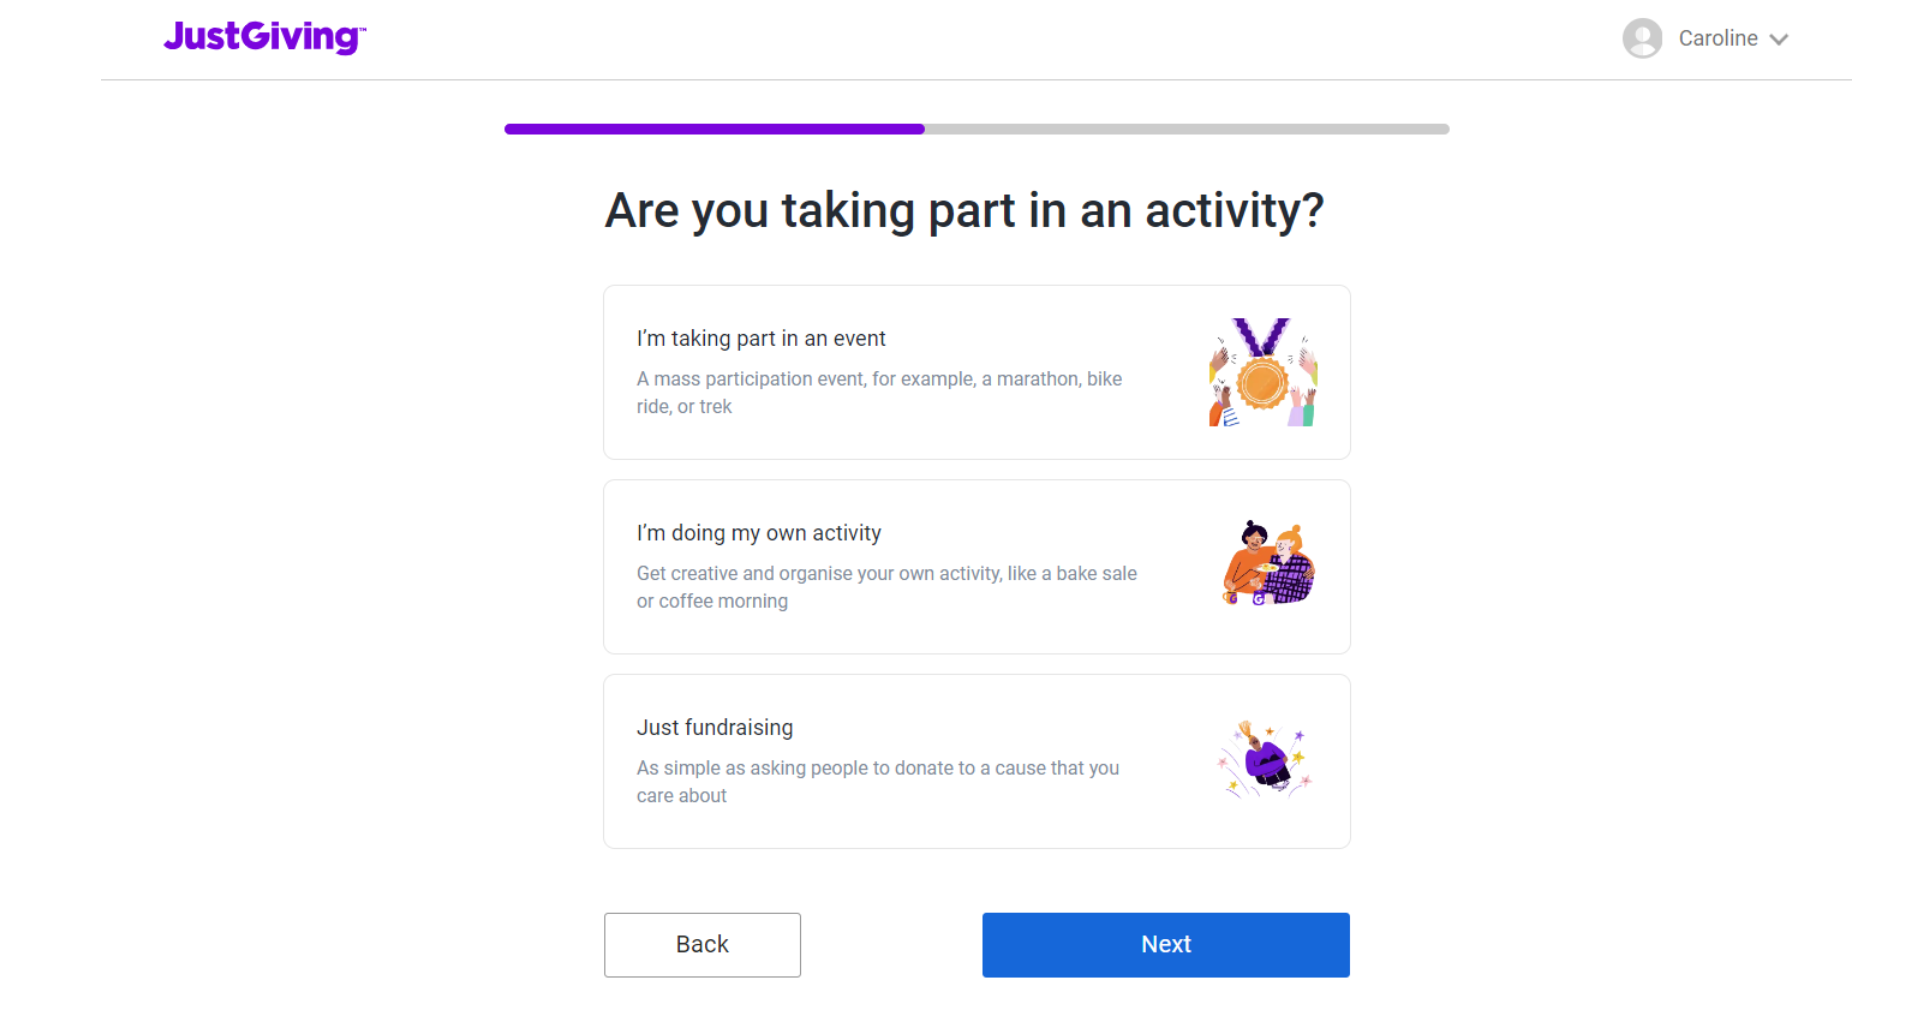 JustGiving guide - how to set up a JustGiving page